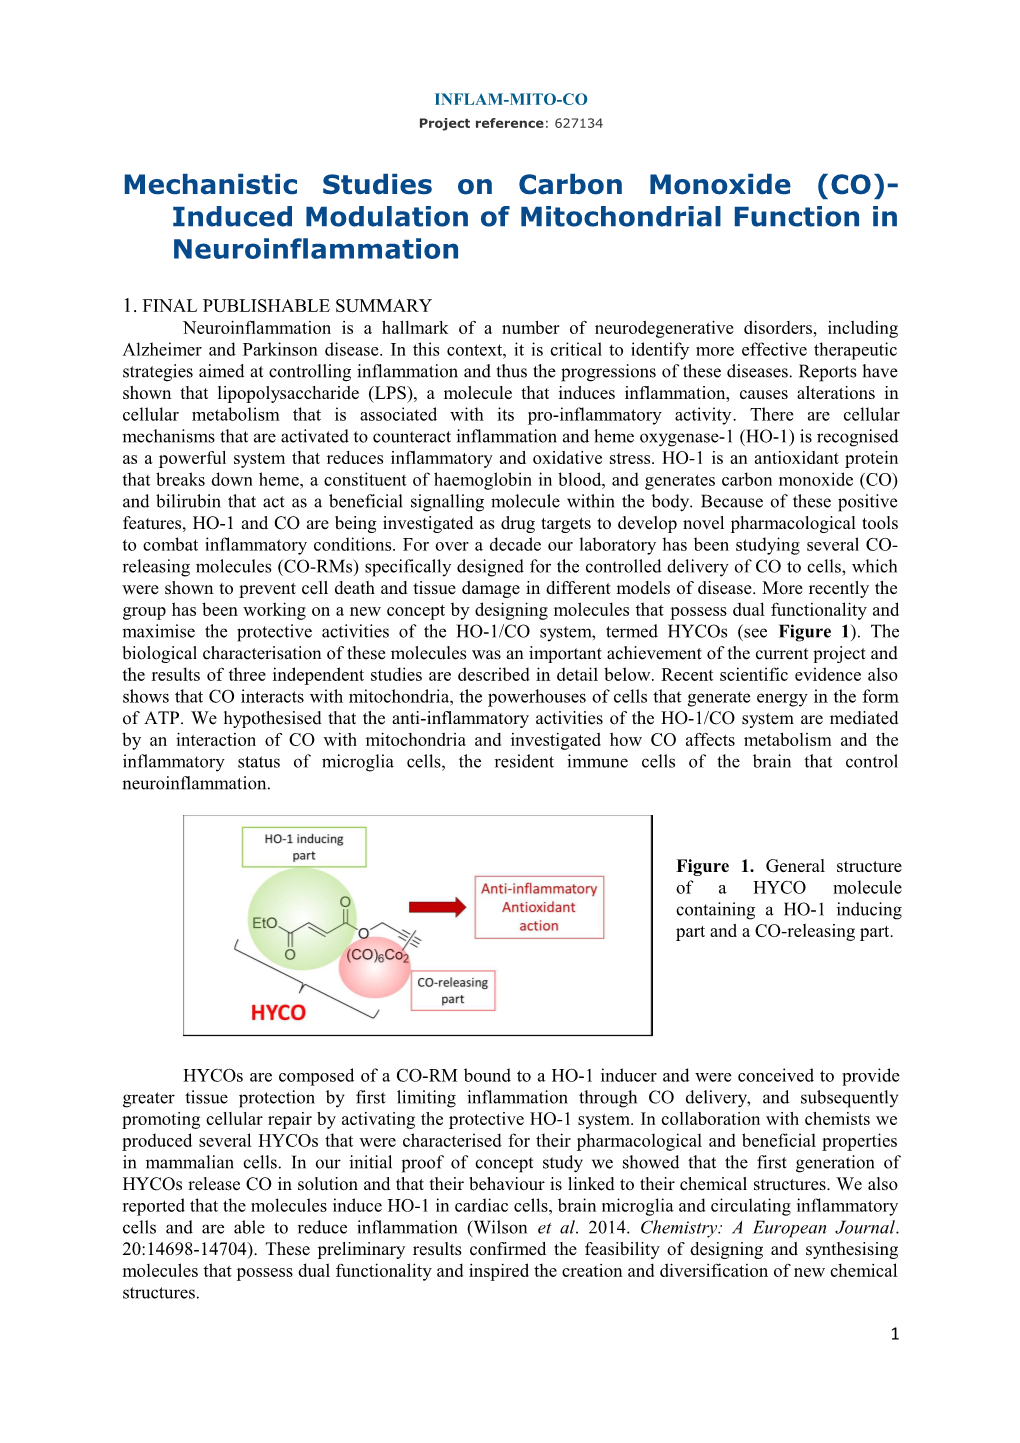 Mechanistic Studies on Carbon Monoxide (CO)-Induced Modulation of Mitochondrial Function